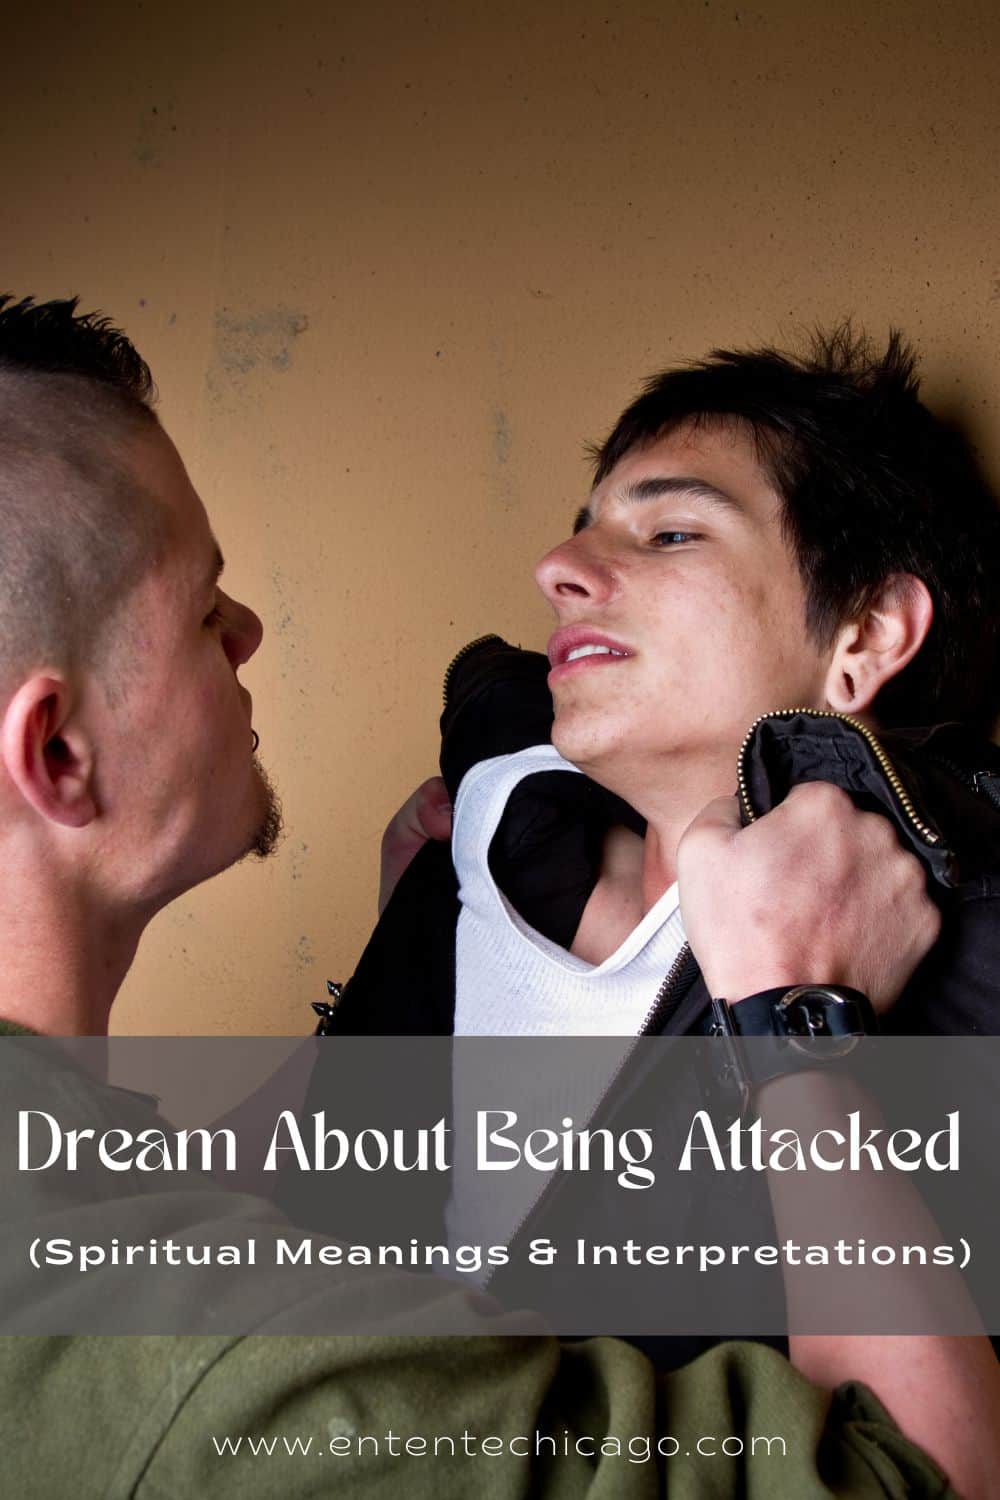 Dream About Being Attacked (Spiritual Meanings & Interpretations)